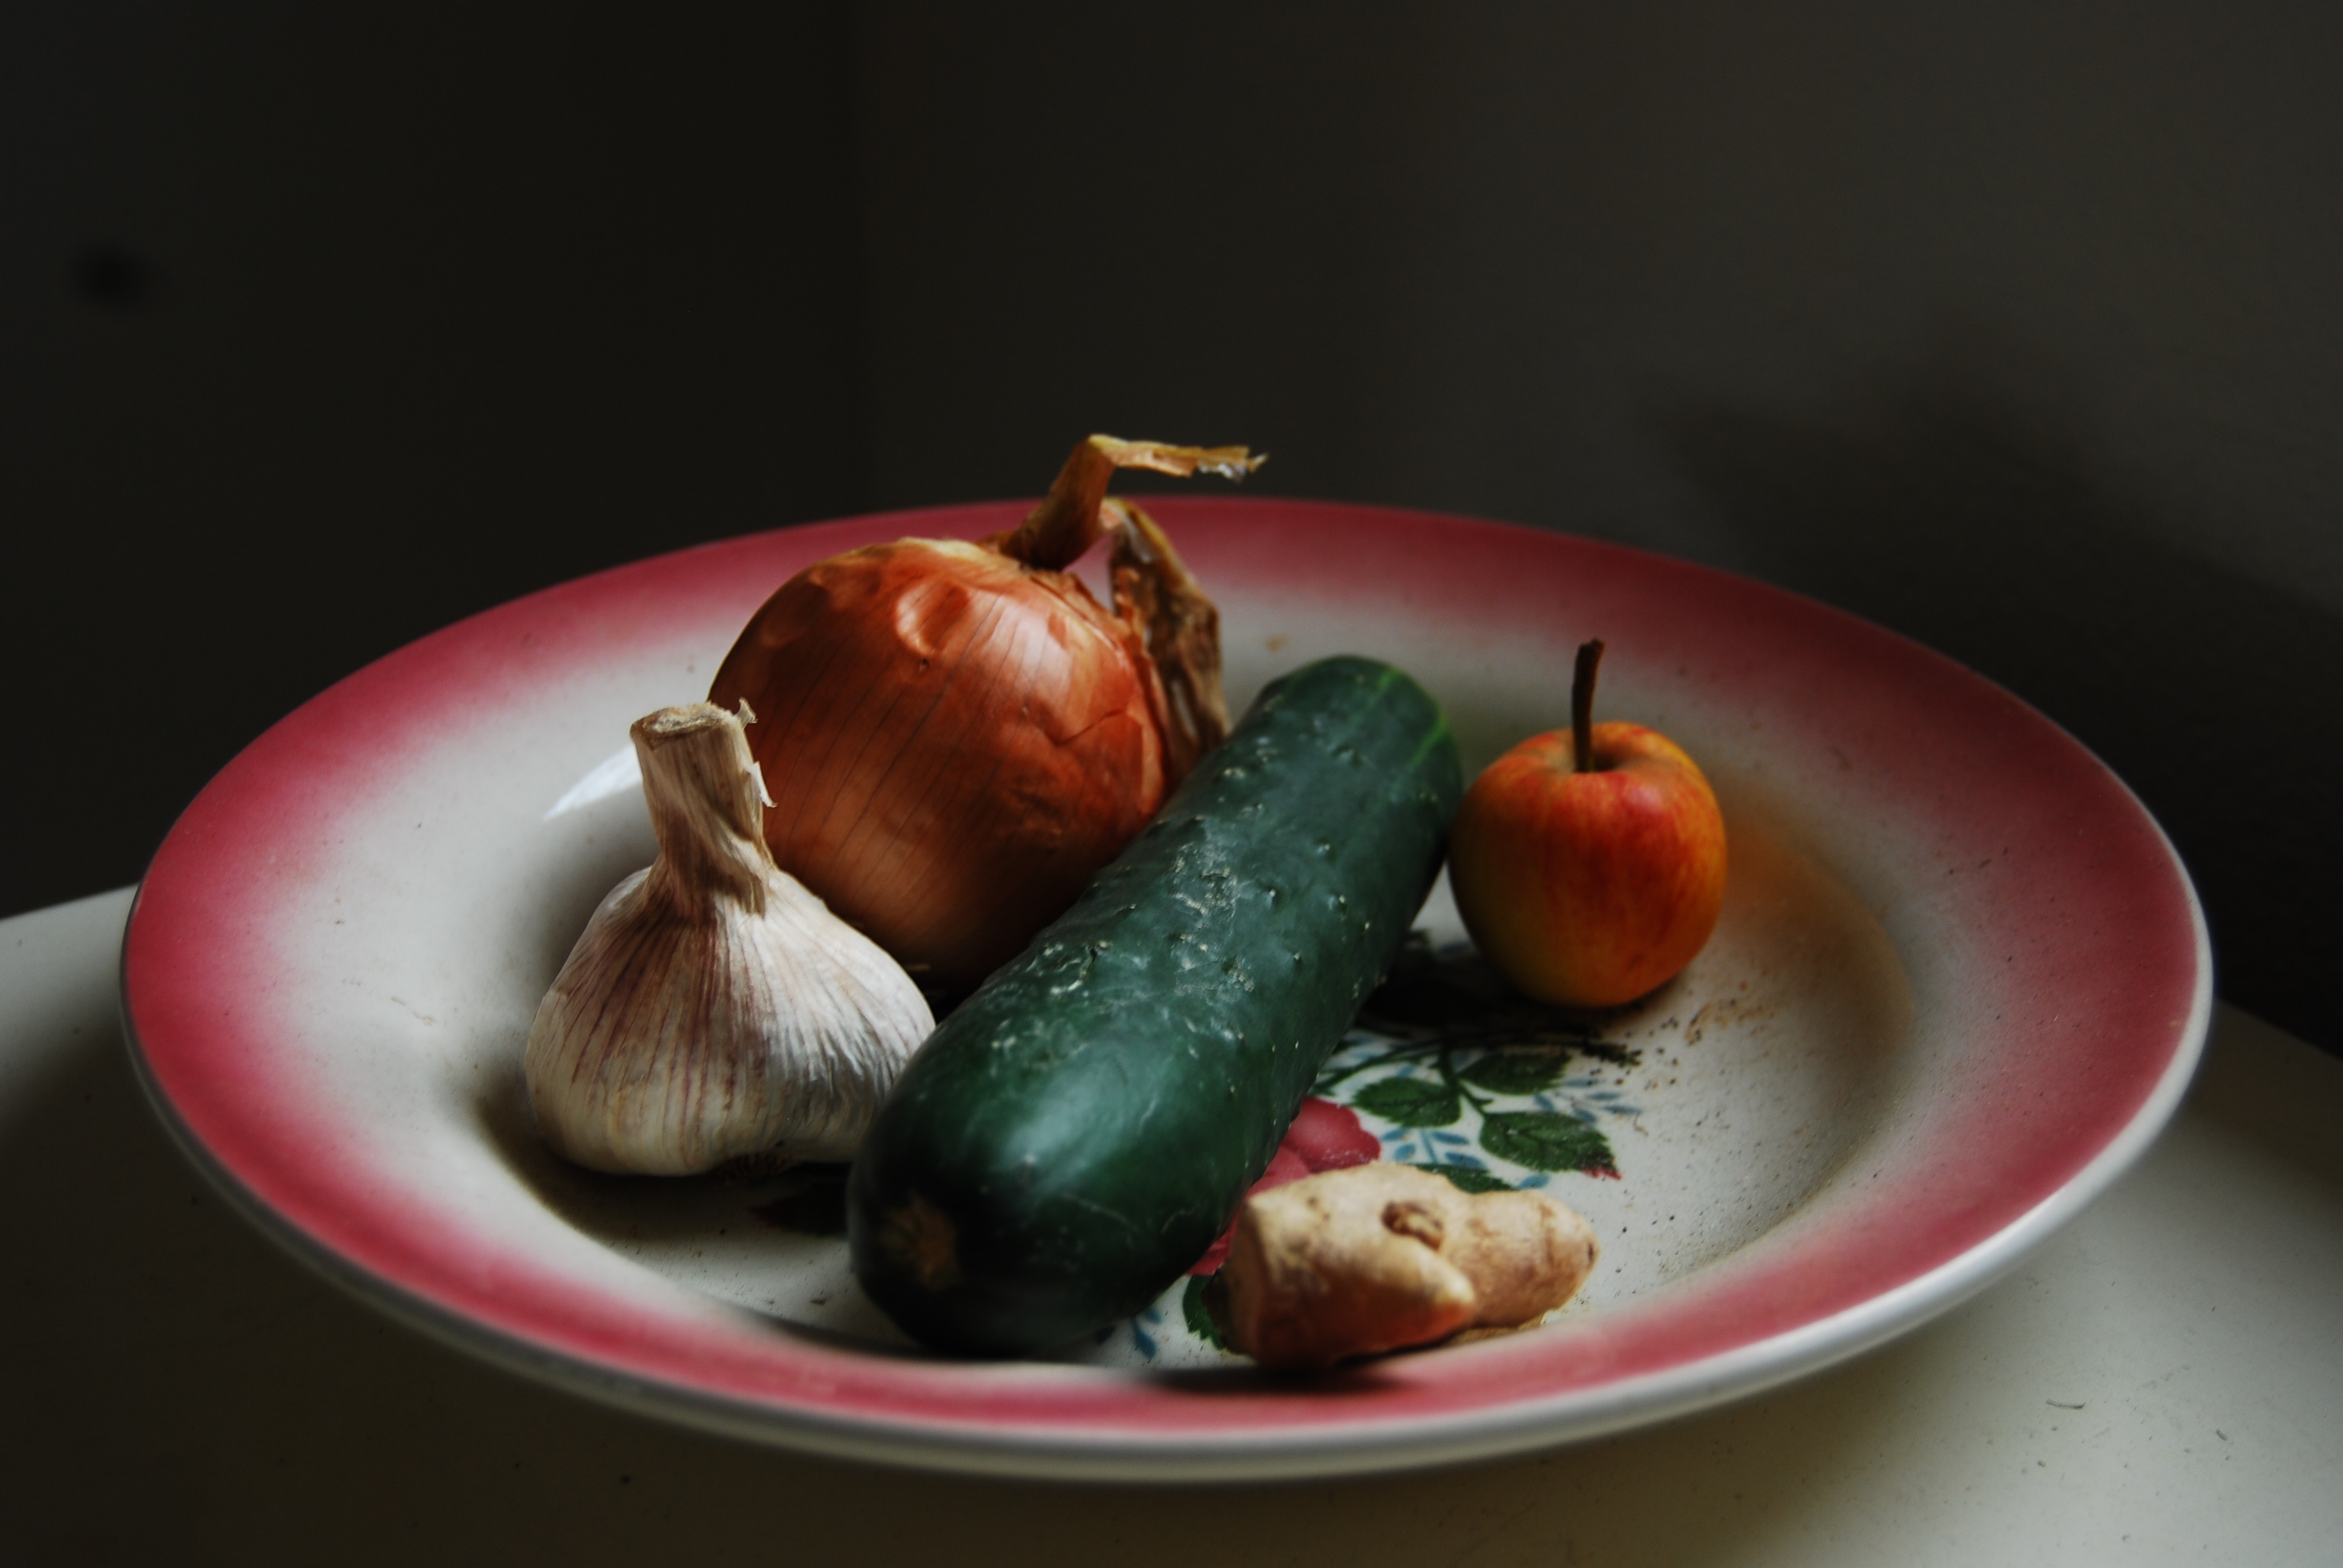 cucumber, garlic, and union on white-and-red ceramic plate